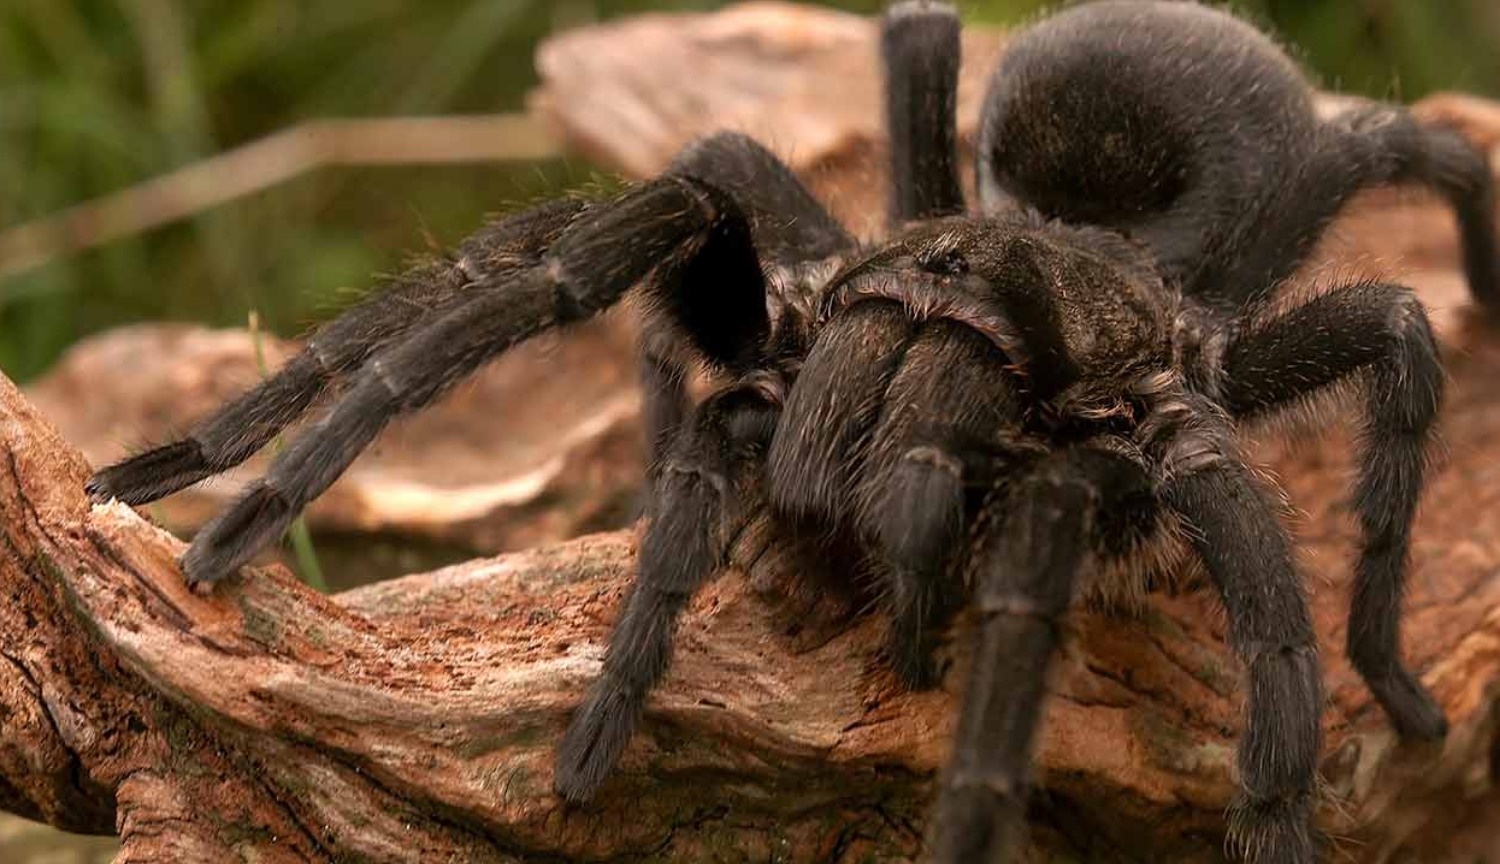 #Video | the Giant spiders were the cause of death of many animals